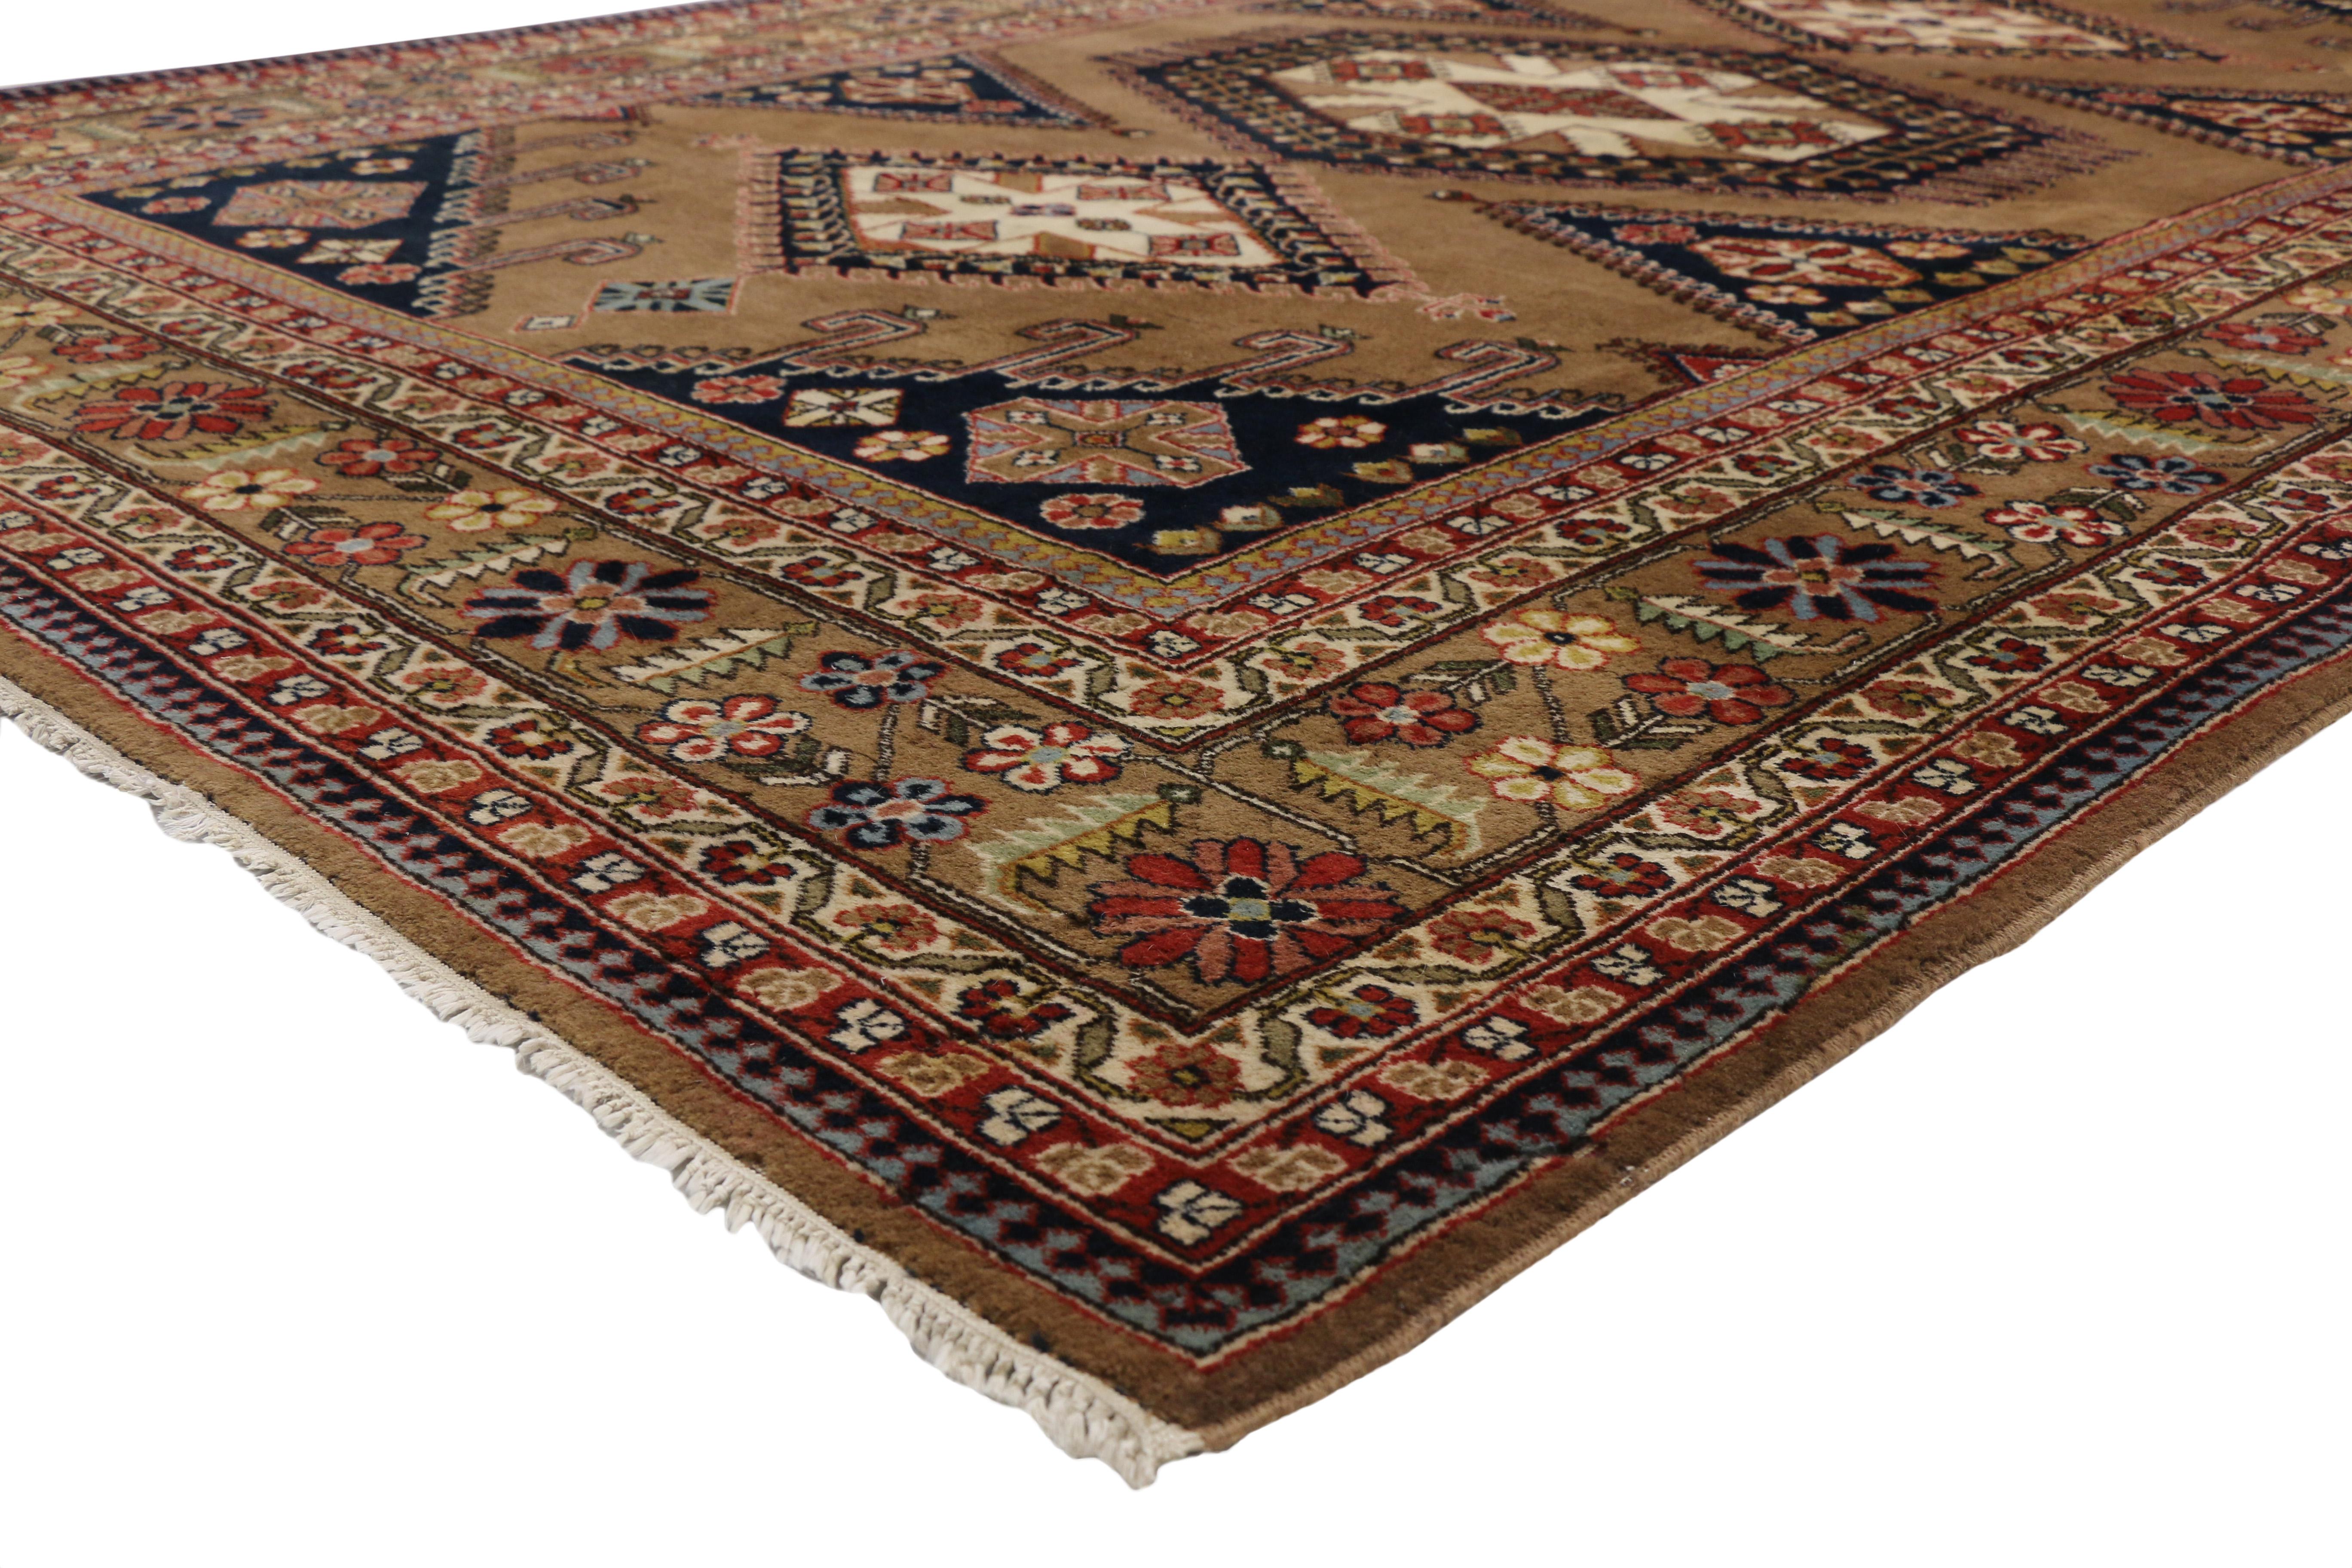 77299, vintage Romanian Tribal rug with Adirondack Lodge style. This hand knotted wool vintage Romanian rug with Adirondack Lodge style features a hexagonal medallion flanked with a lozenge at either end anchored with small diamond pendants floating